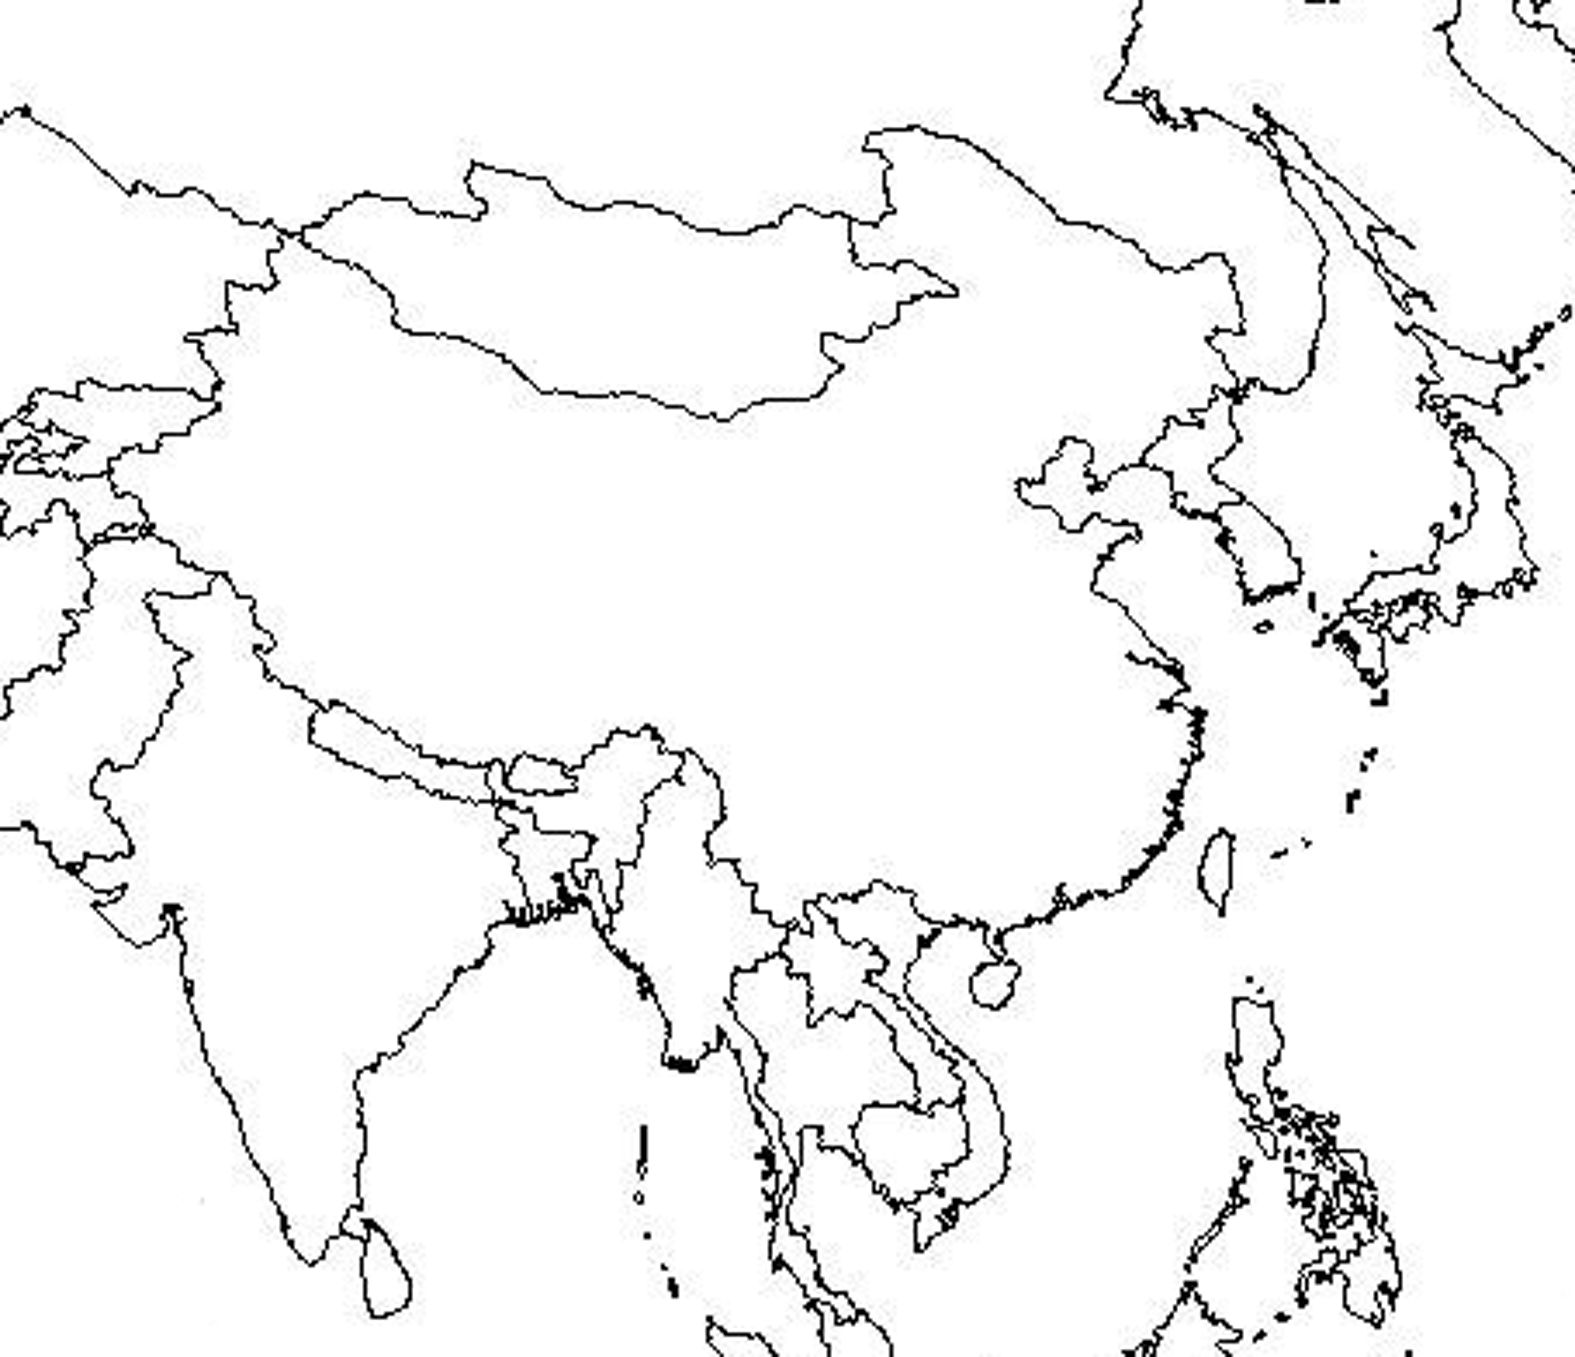 Outline Map Of Asia And Middle East | Asia map, South asia map, East asia  map